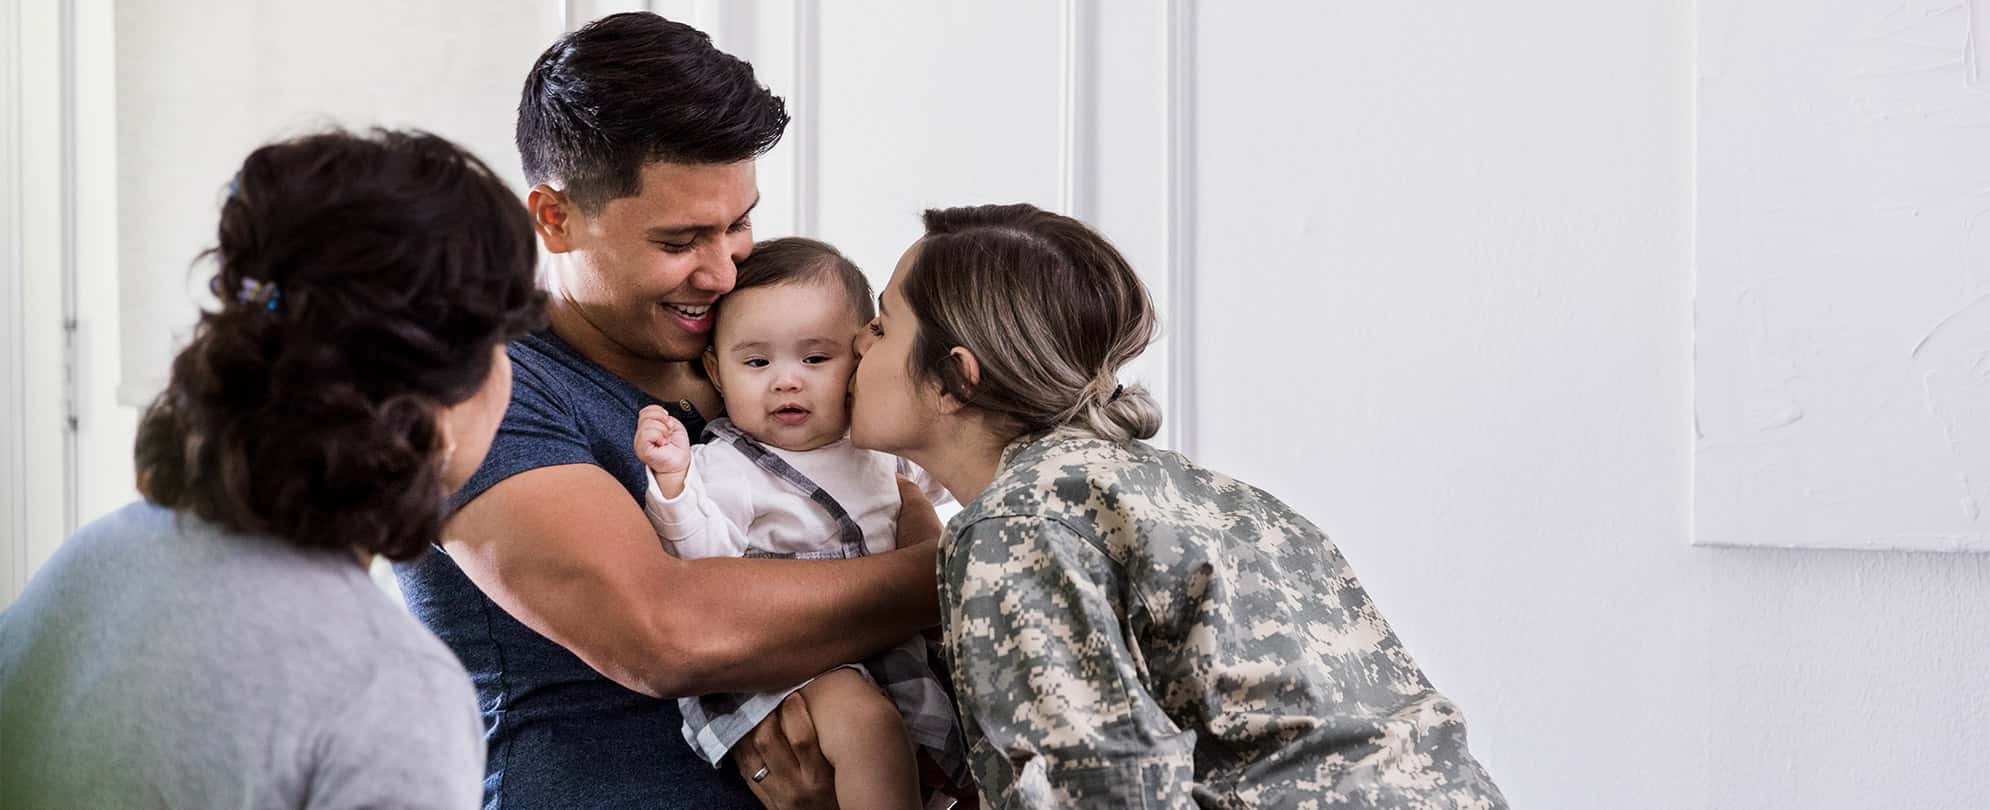 A grandmother lovingly watches a father holding baby while a military mom leans over to kiss the child on the cheek.